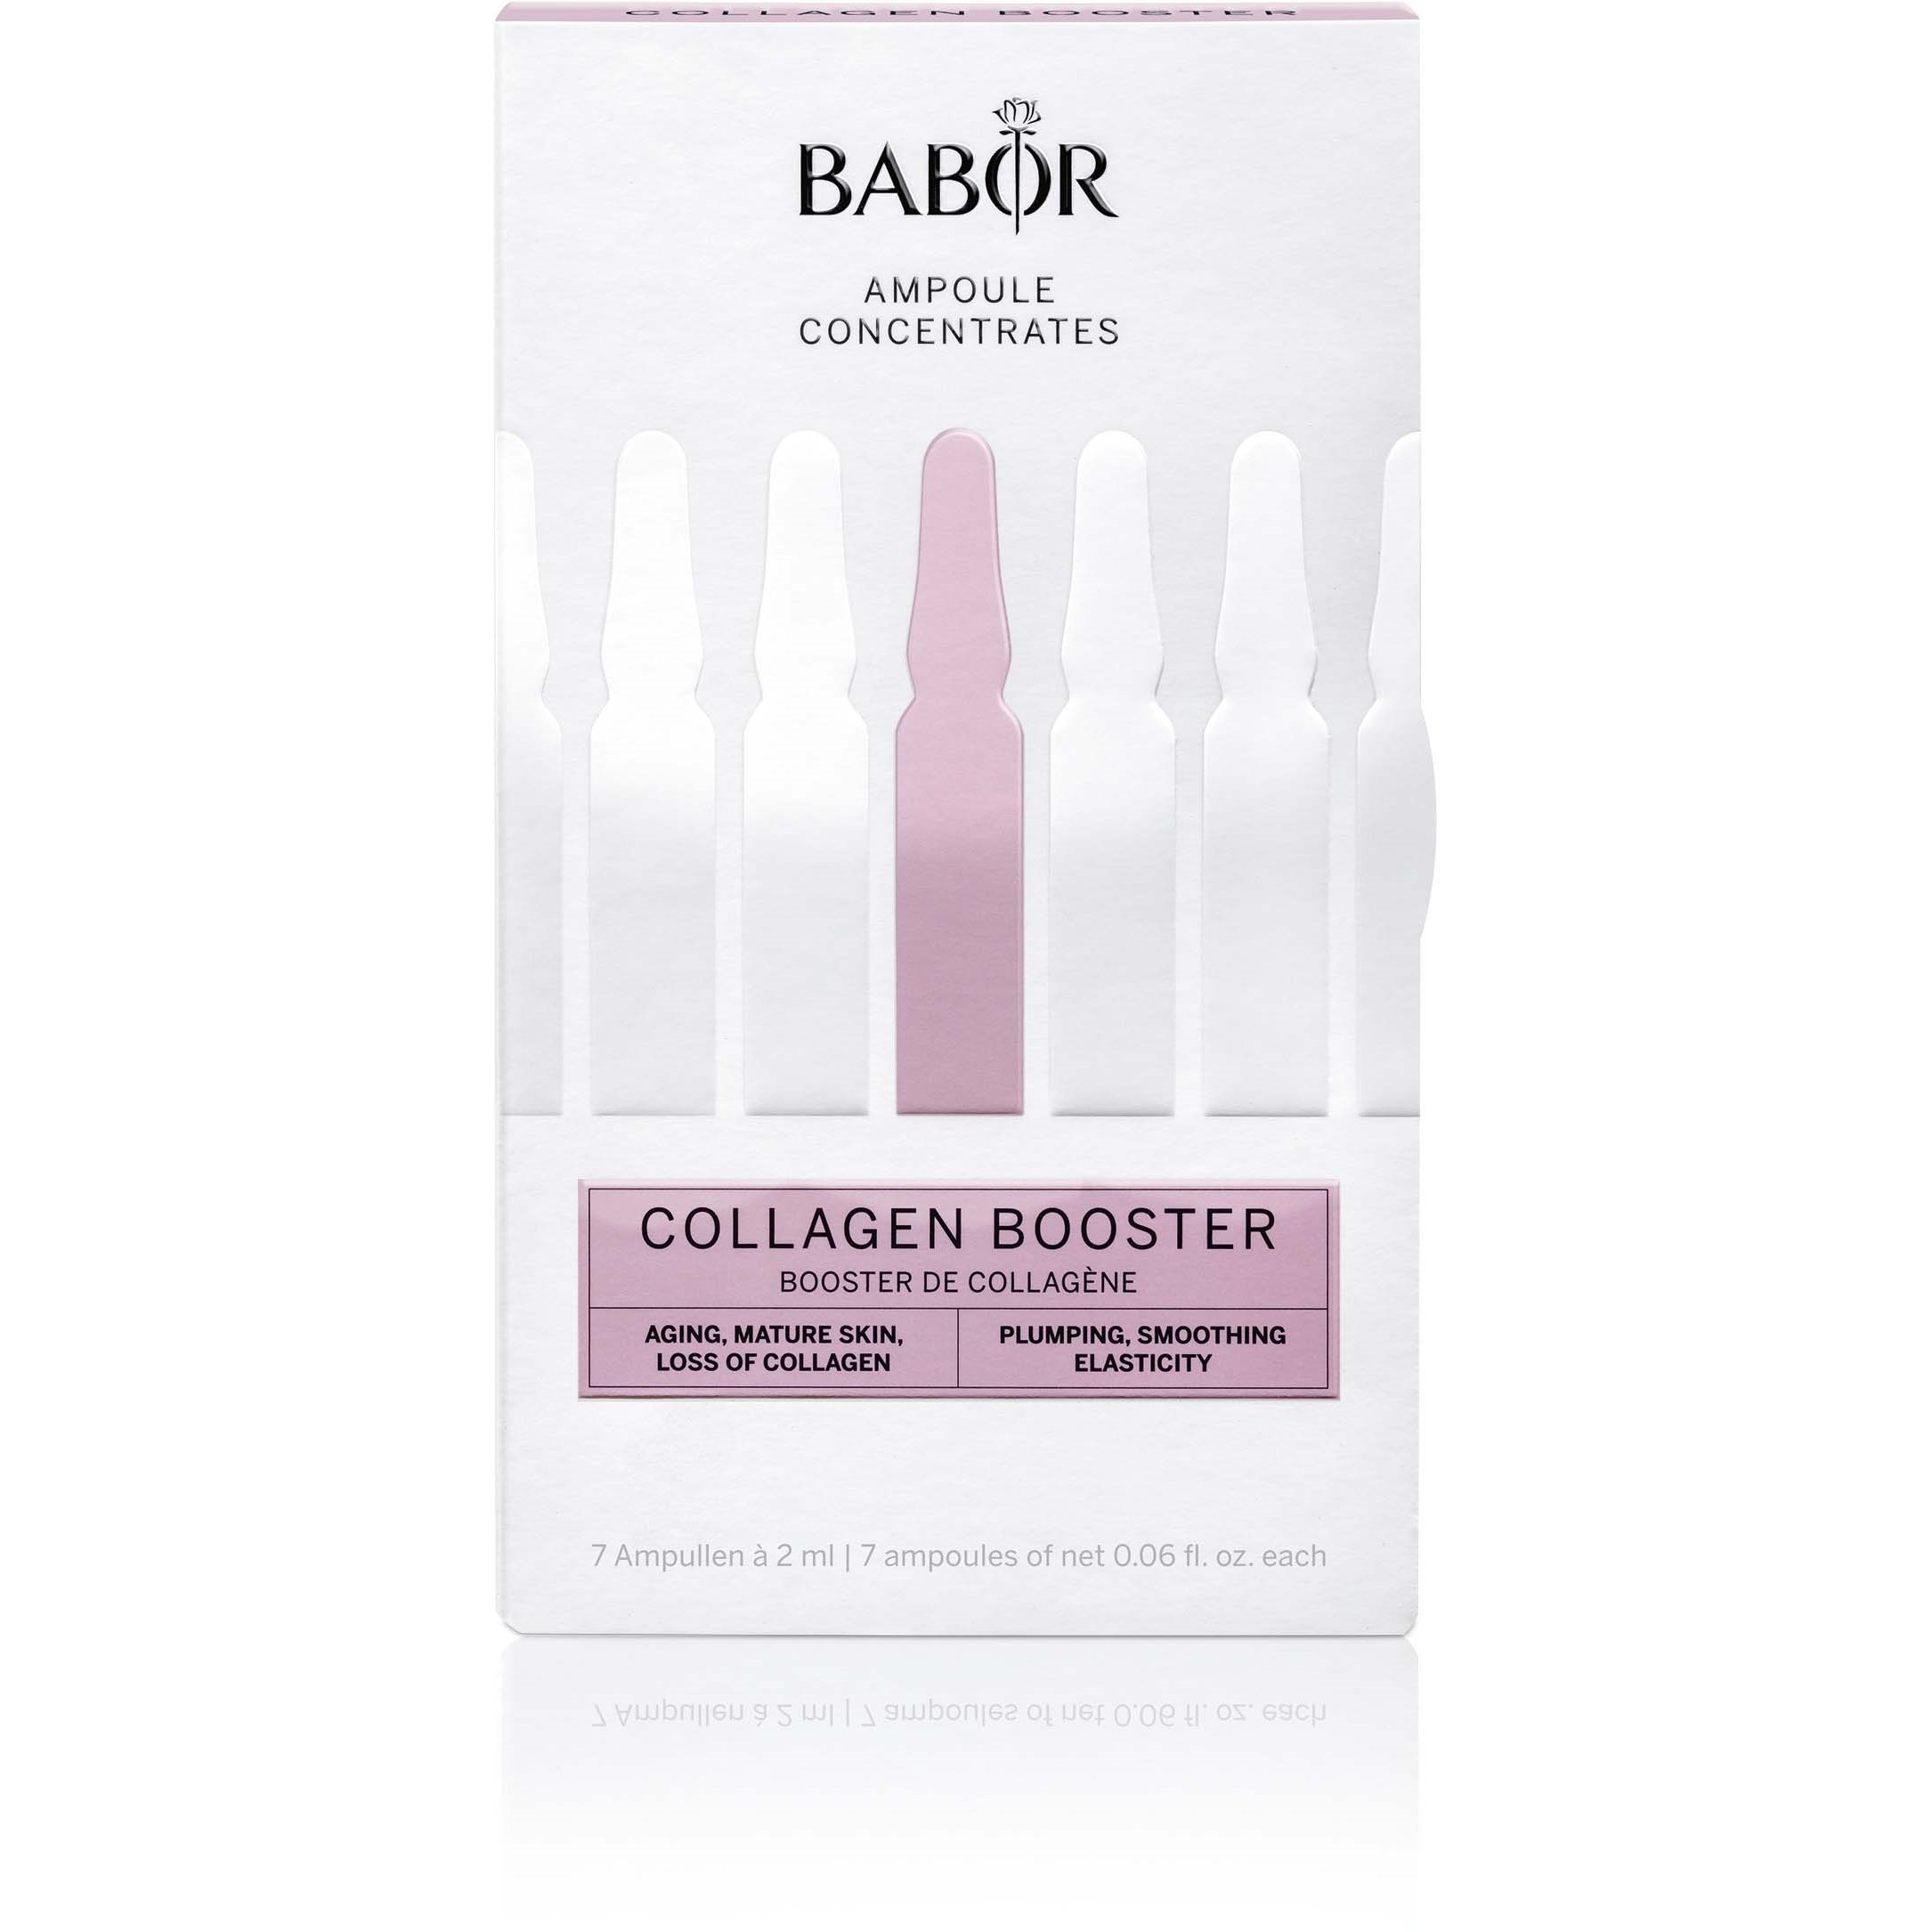 Läs mer om BABOR Ampoule Concentrates Collagen Booster 14 ml